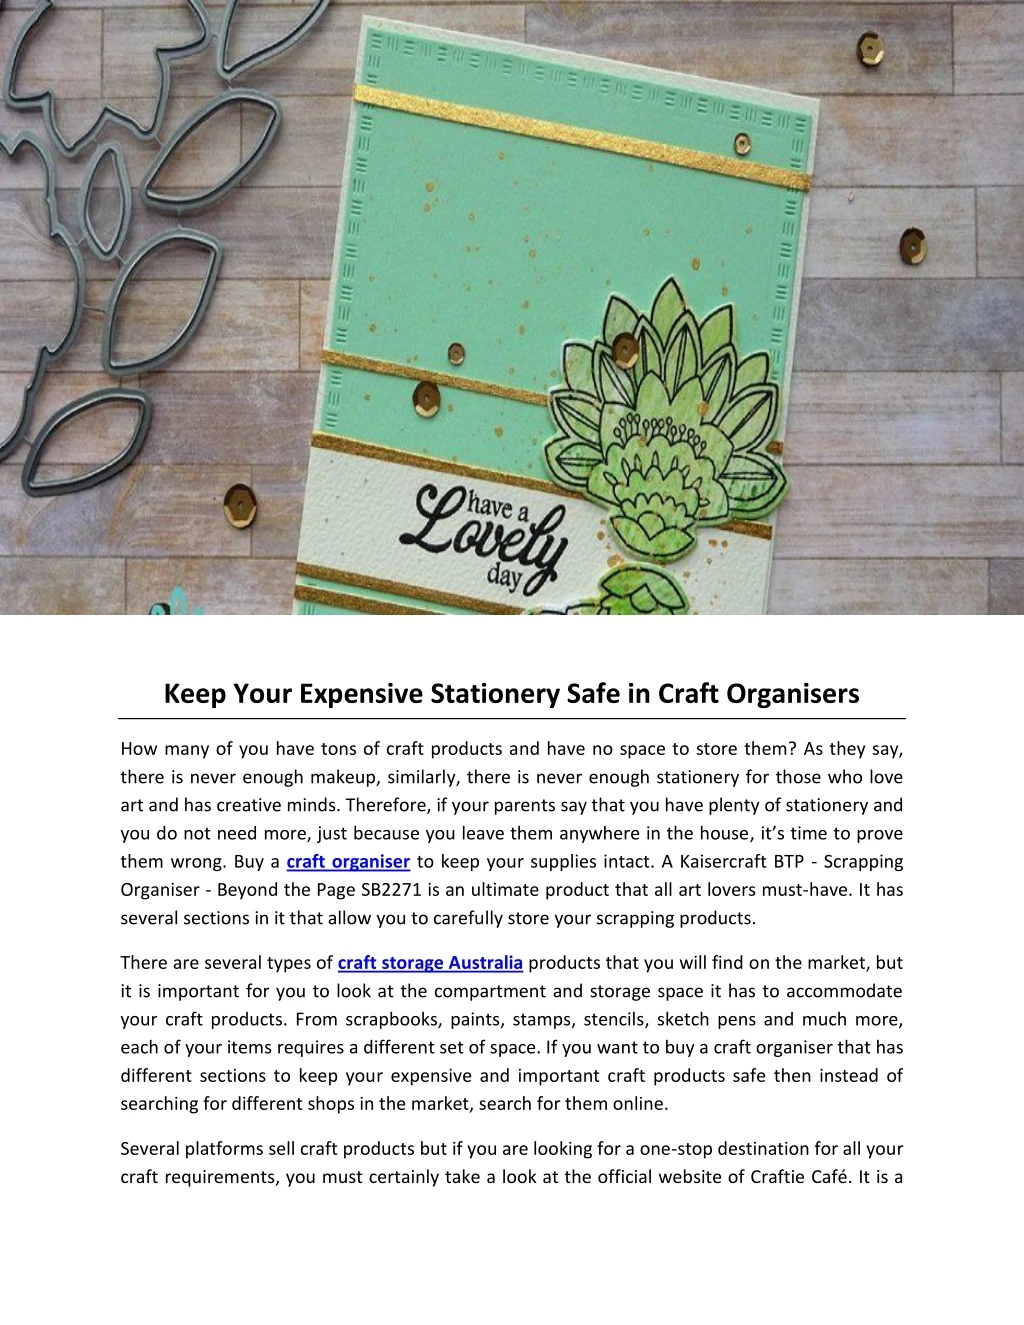 keep your expensive stationery safe in craft